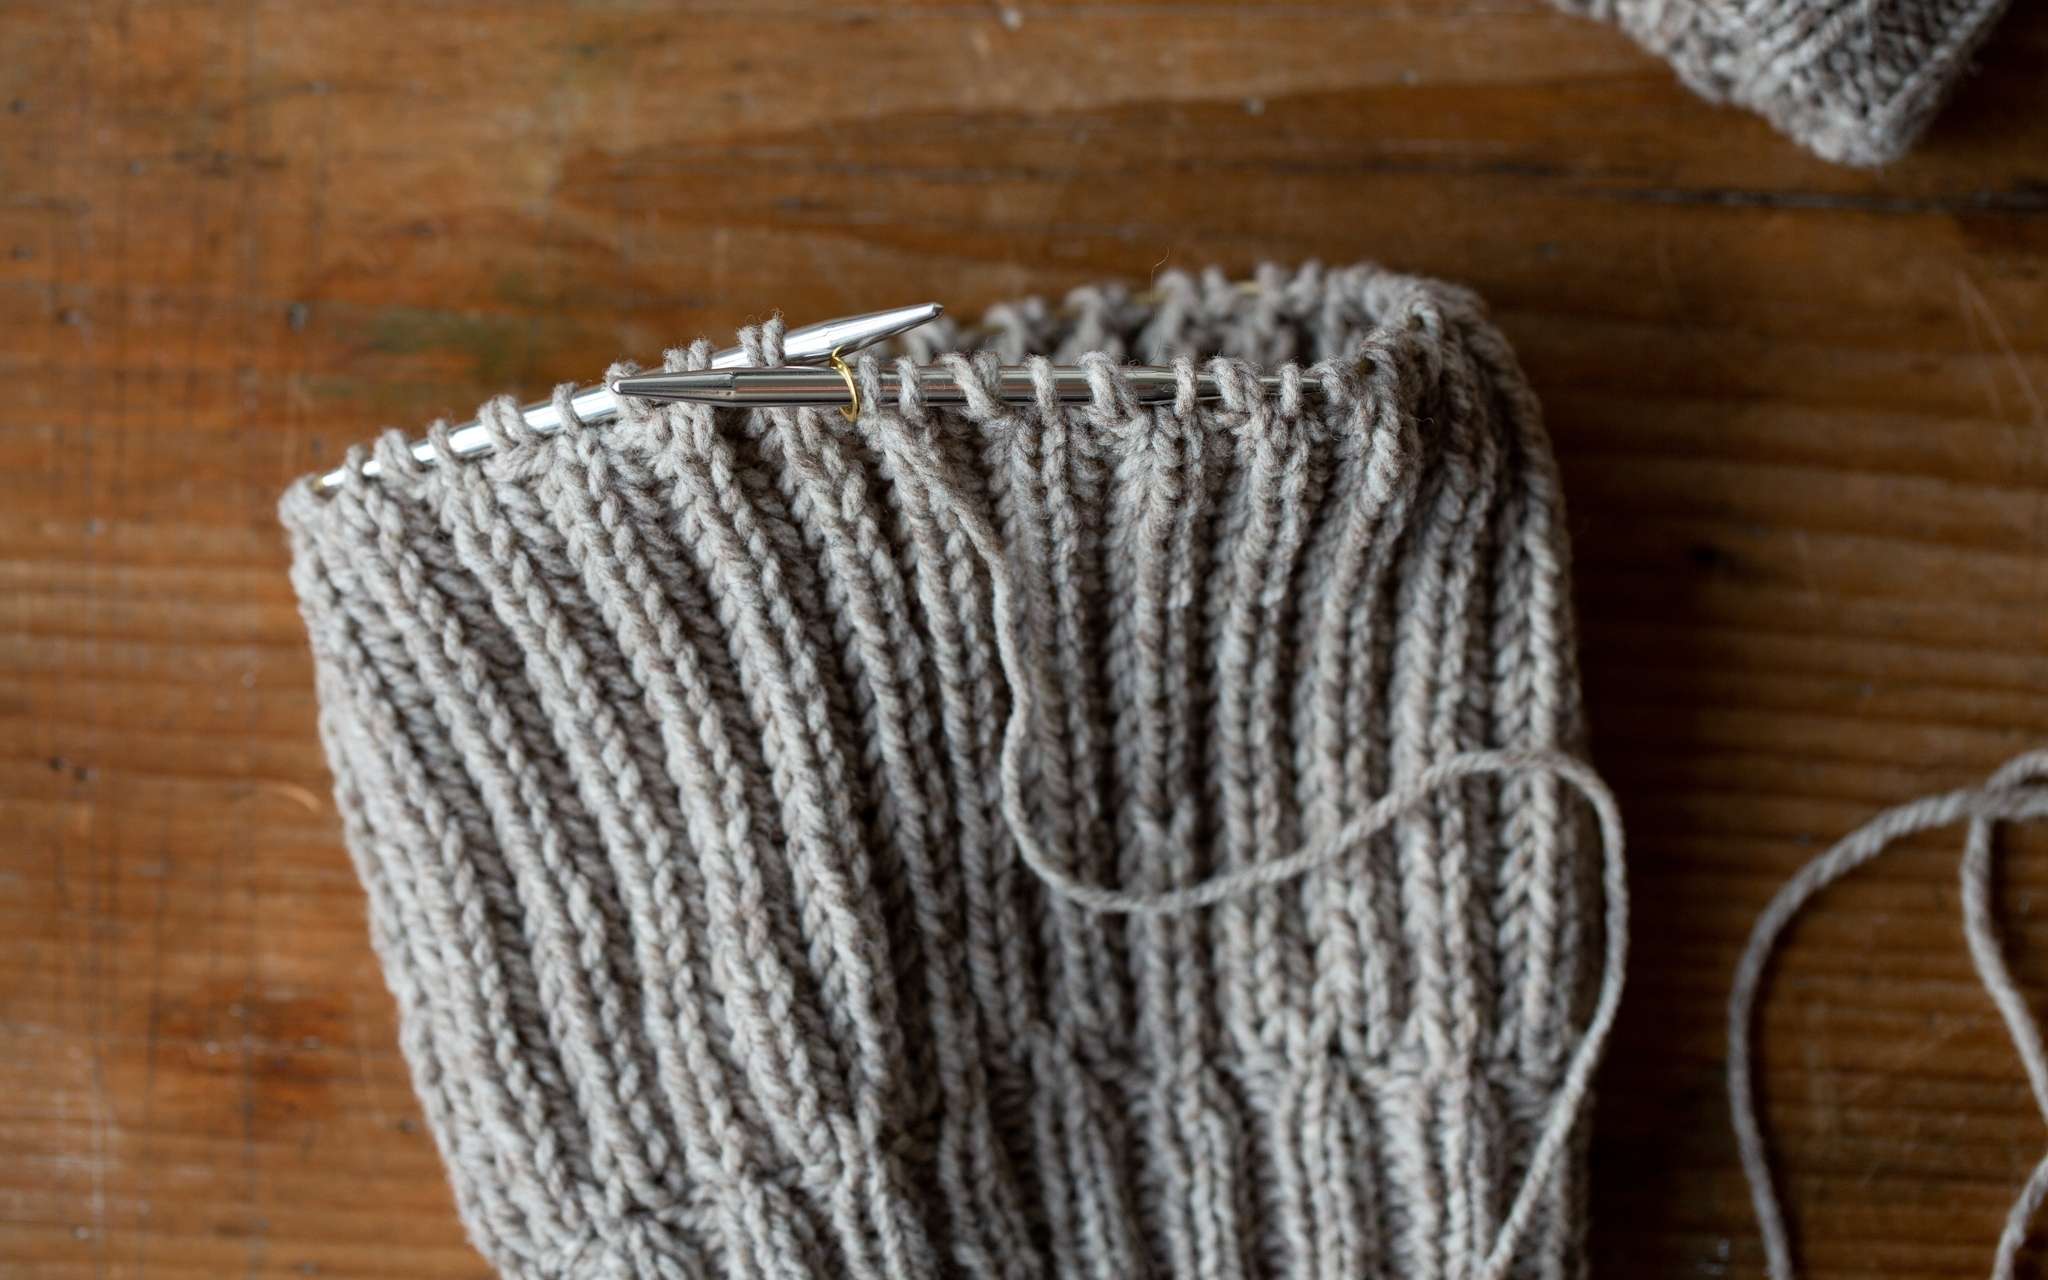 A hat in progress knitted in a brioche stitch, showing the yarn overs created nestled beside their corresponding stitches on the needle.